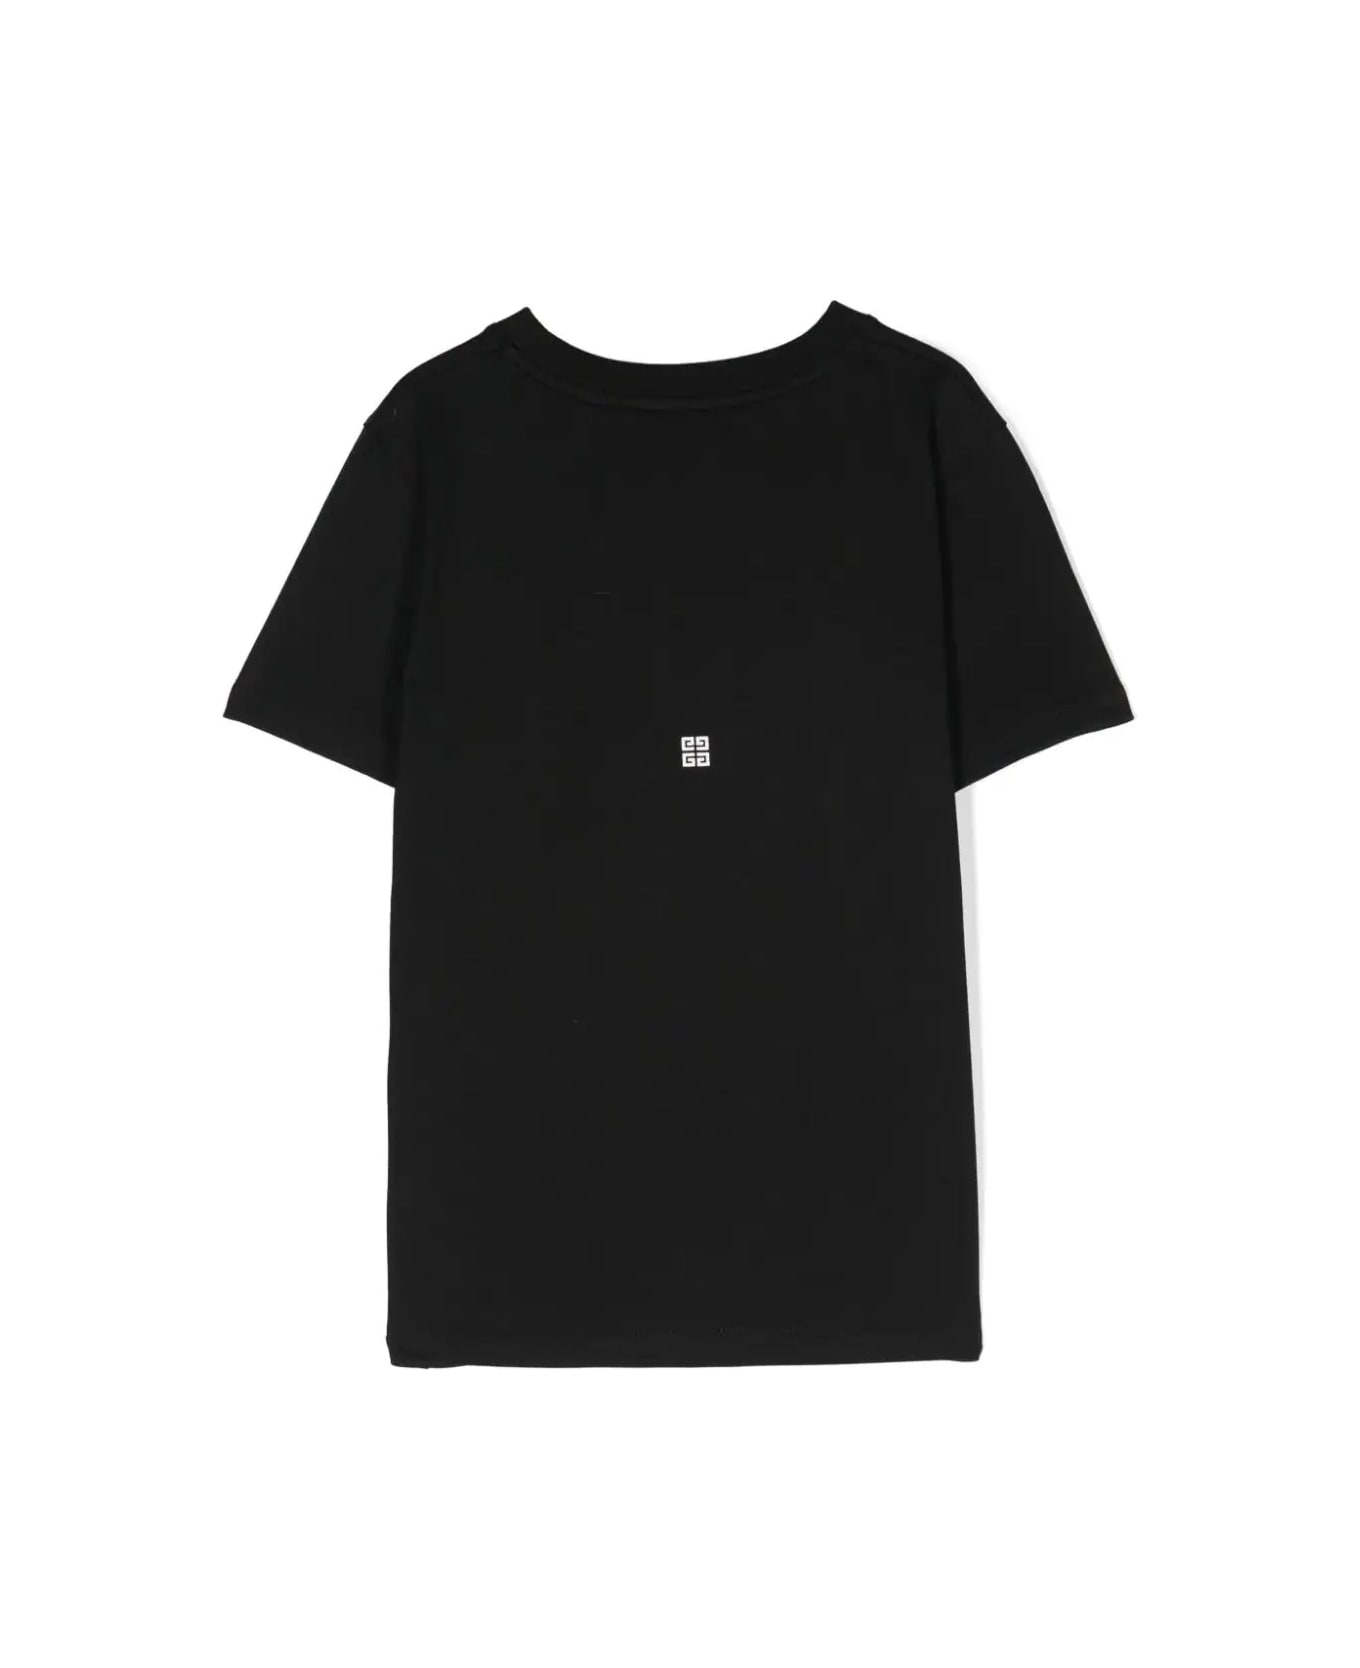 Givenchy Black T-shirt With 4g Givenchy Micro Logo - Black Tシャツ＆ポロシャツ